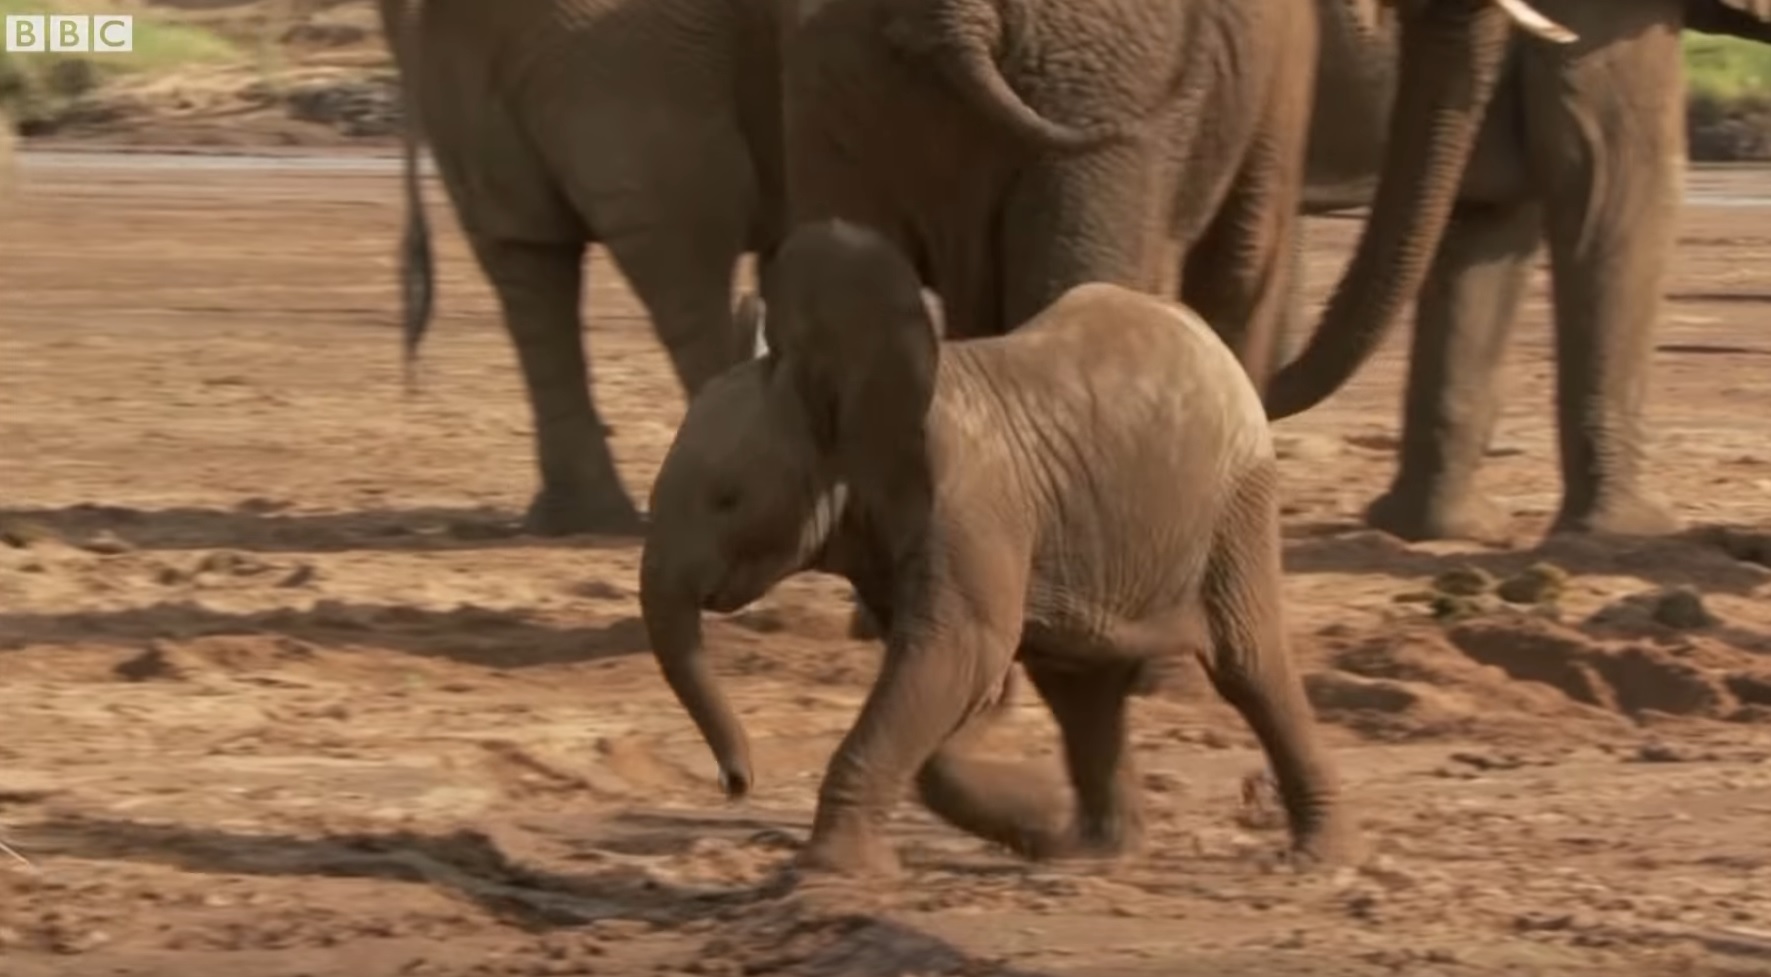 Baby Elephant Plays In The Sand